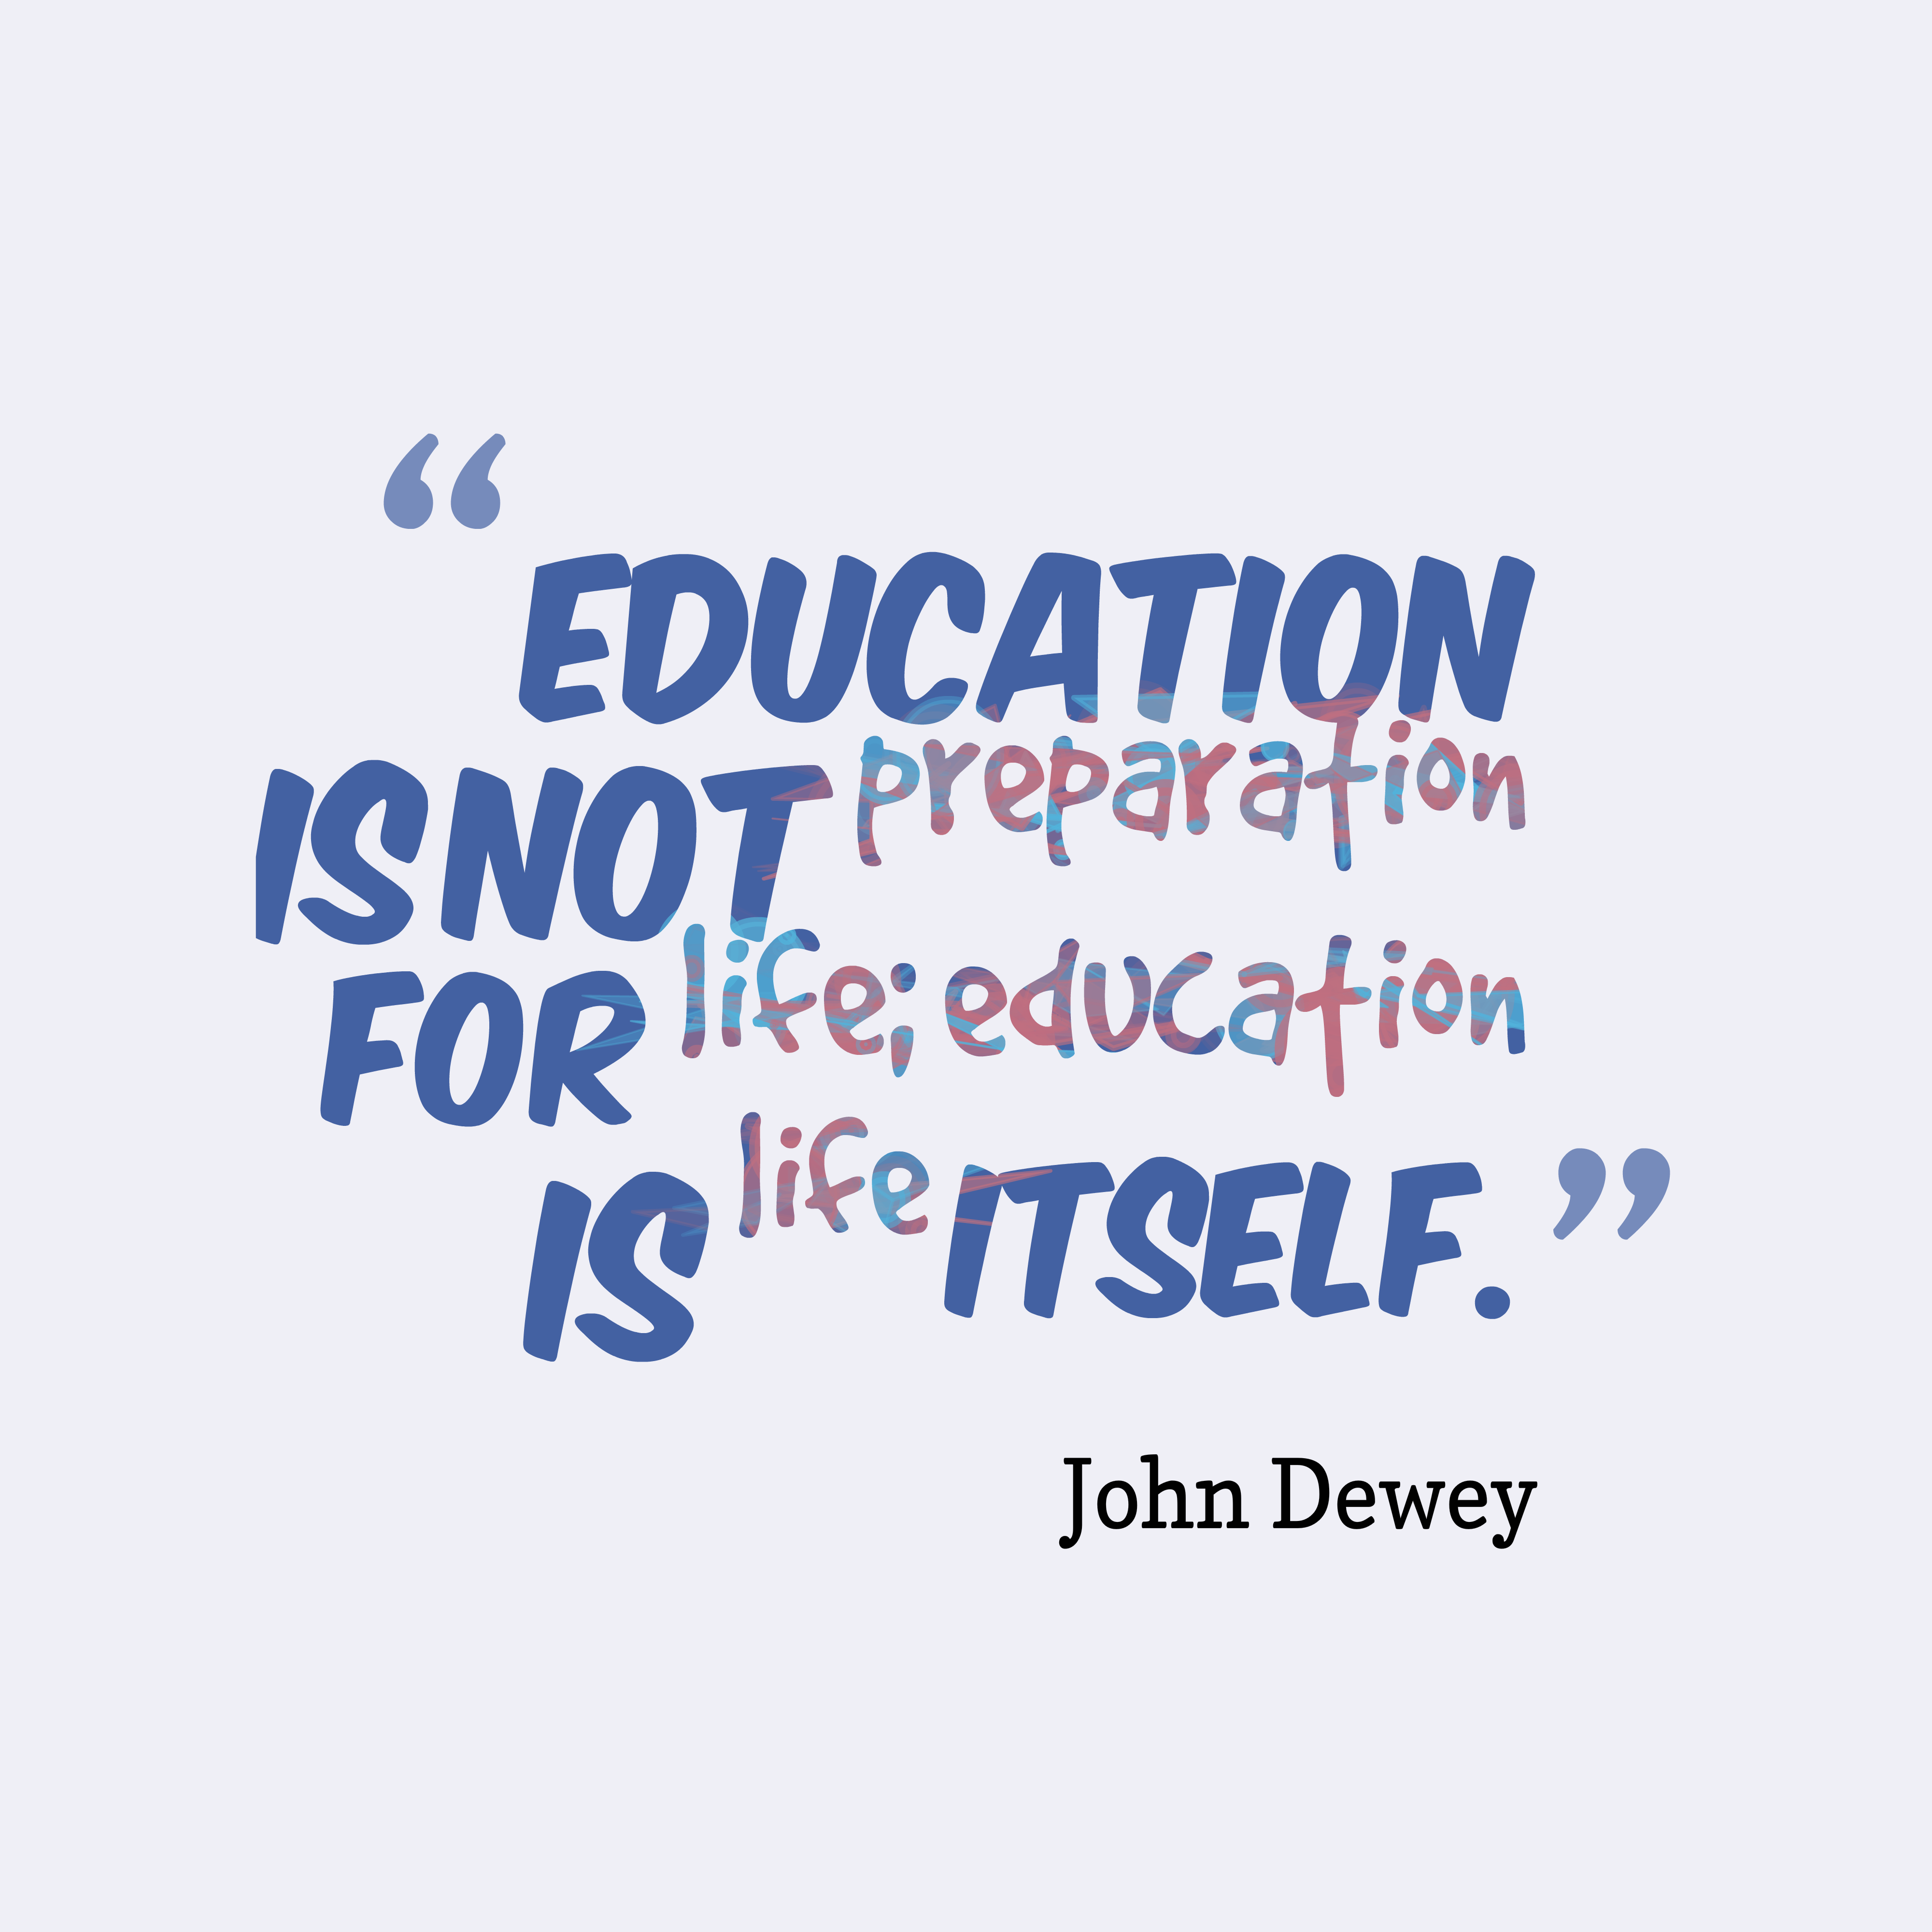 Education Is Not Preparation For Life; Education Is Life Itself.  - John Dewey